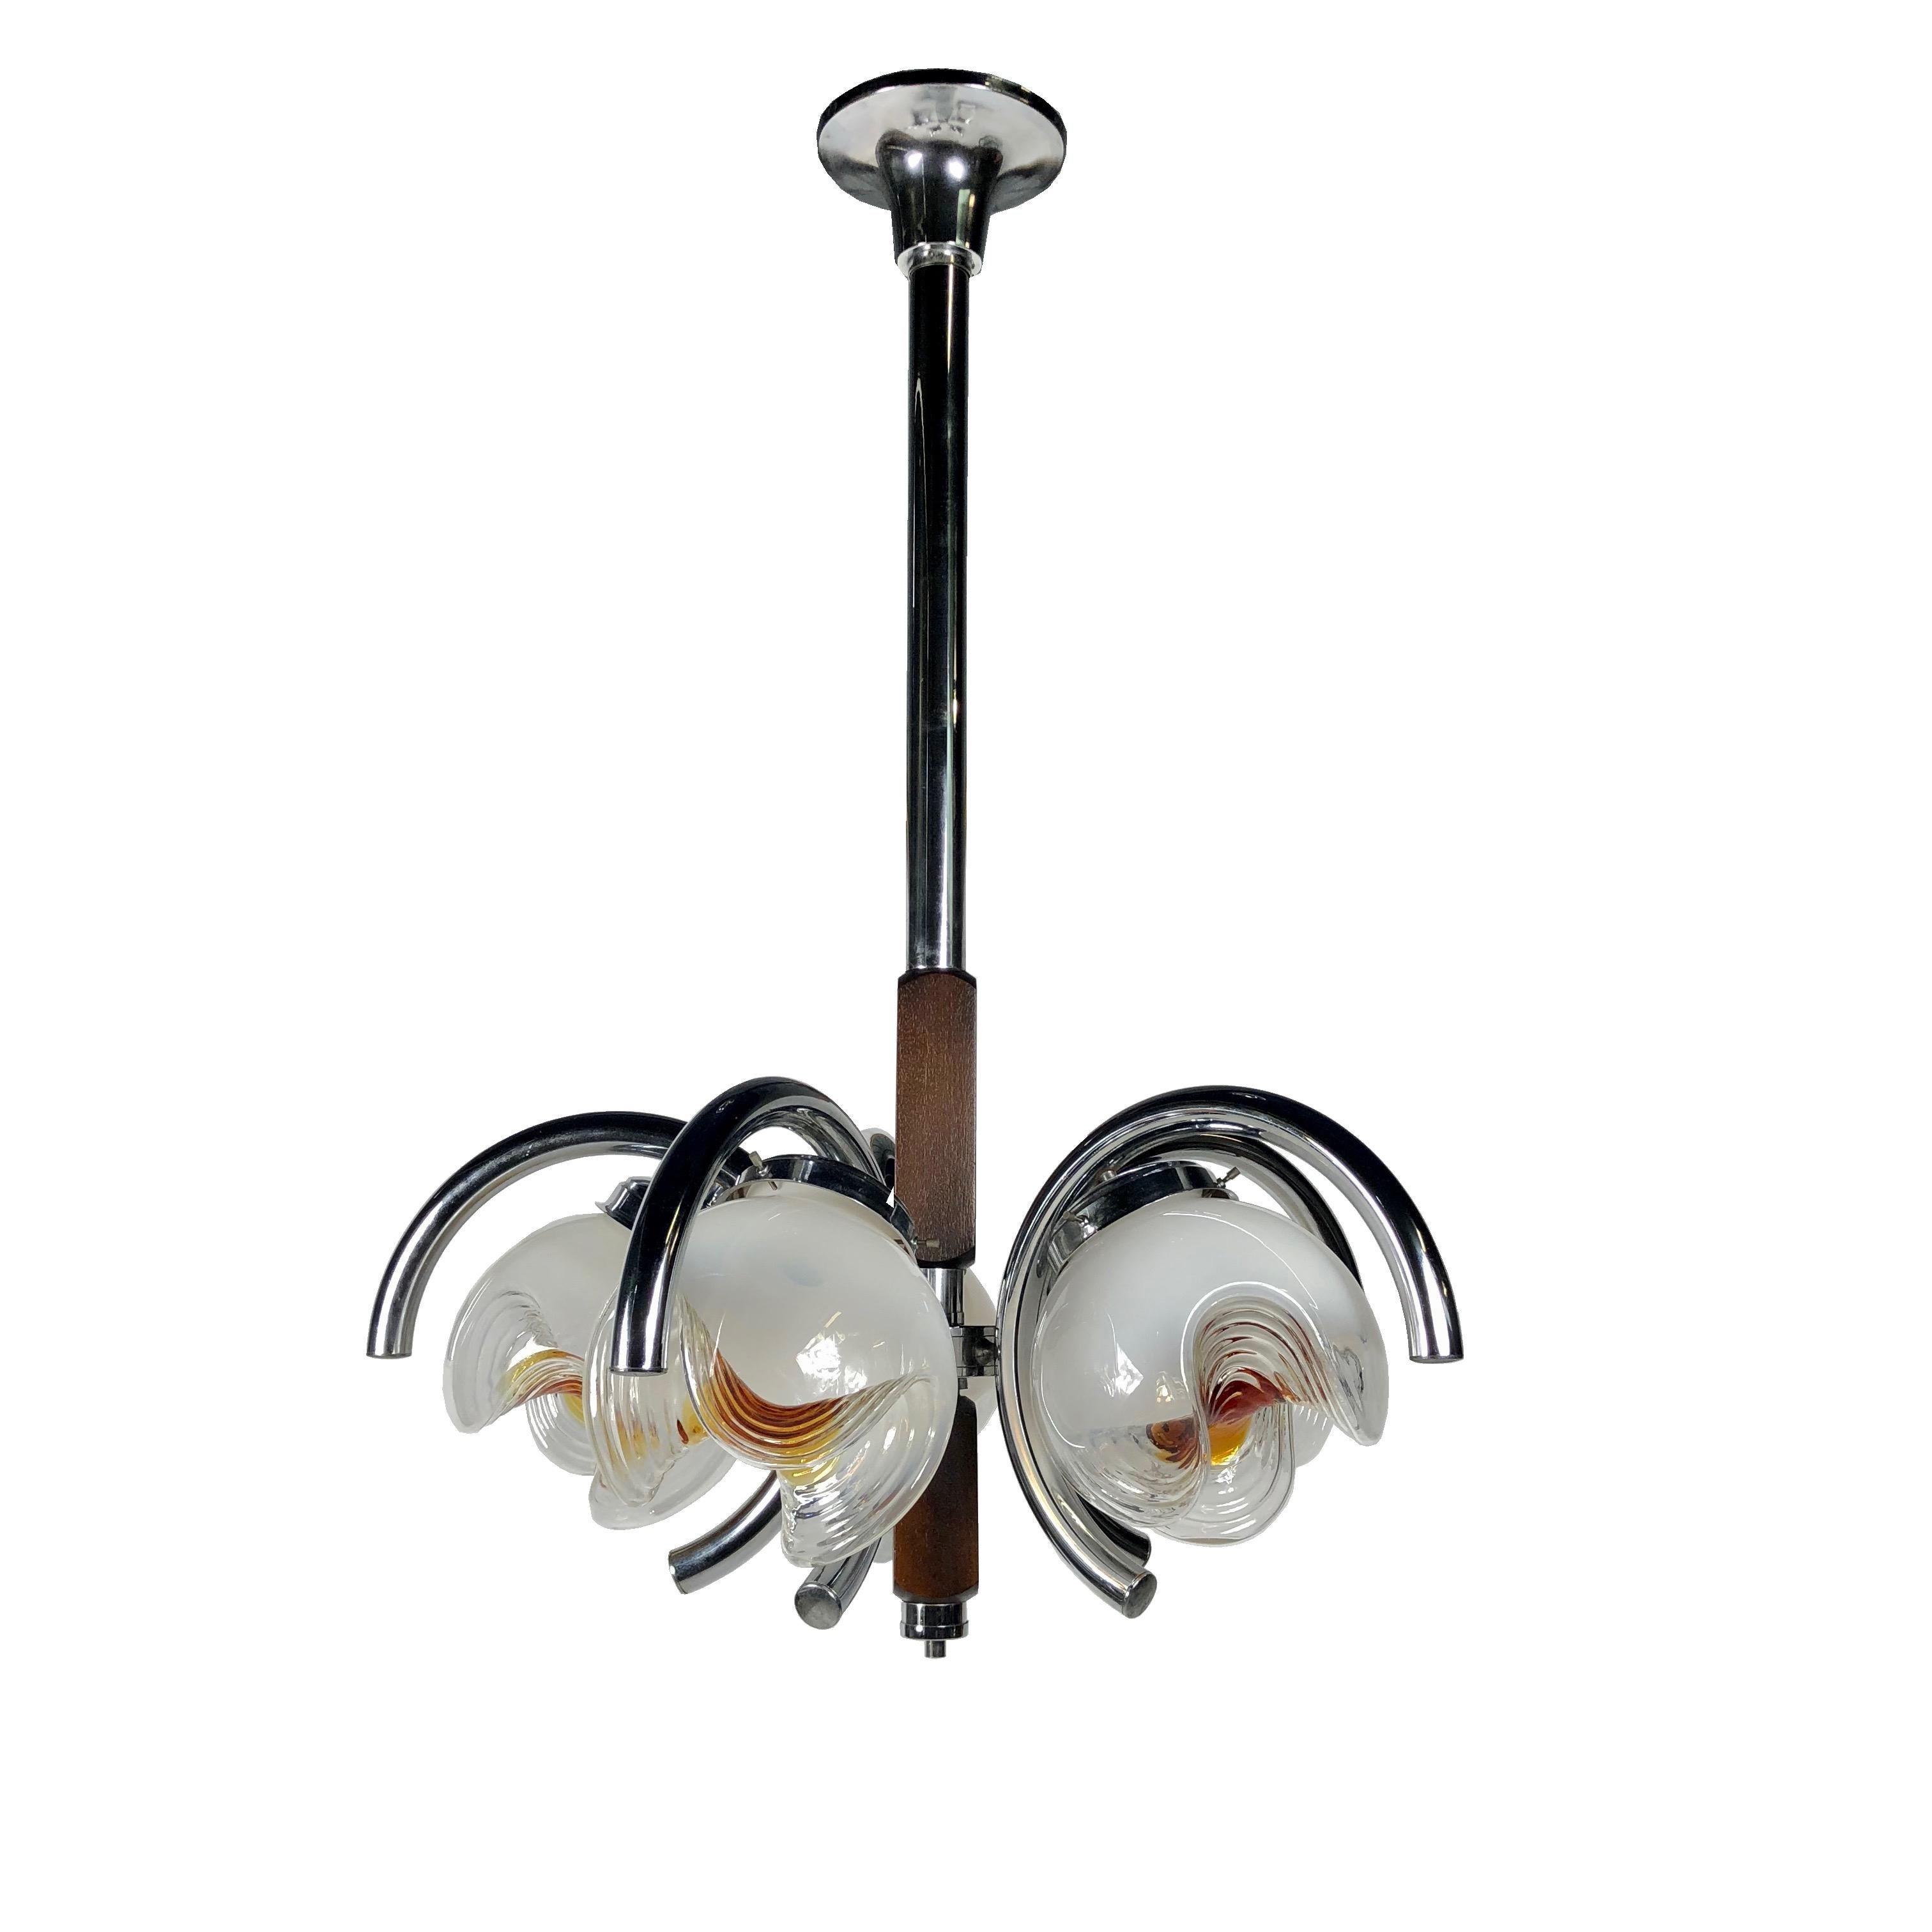 Chandelier pendant by Italian designer Mazzega, featuring his signature white to amber artistic handblown glass globes. Five Murano glass balls surrounded by curved chrome tubes and connected by on a long chrome pole covered with wood. 
Pretty soft